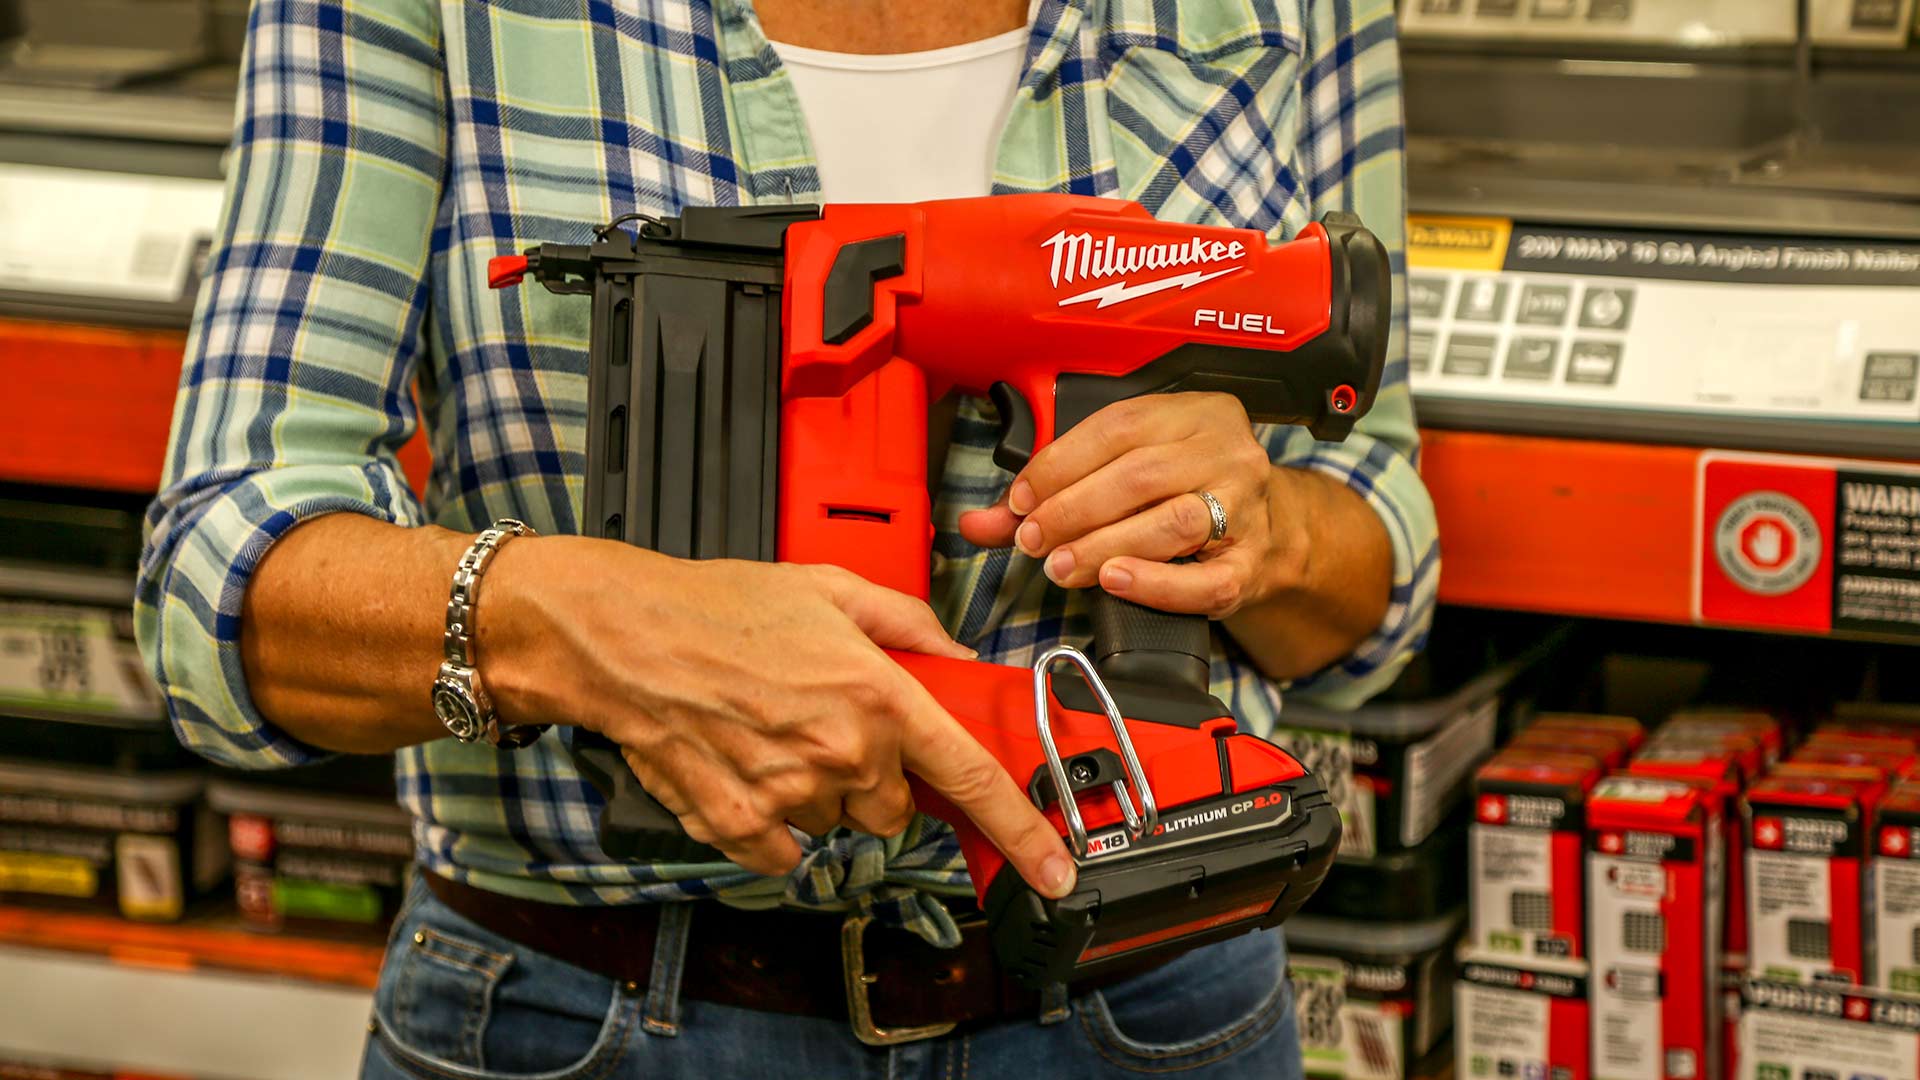 Jodi Marks holds a Milwaukee Brad Nailer in a Home Depot store during a Best New Products taping.